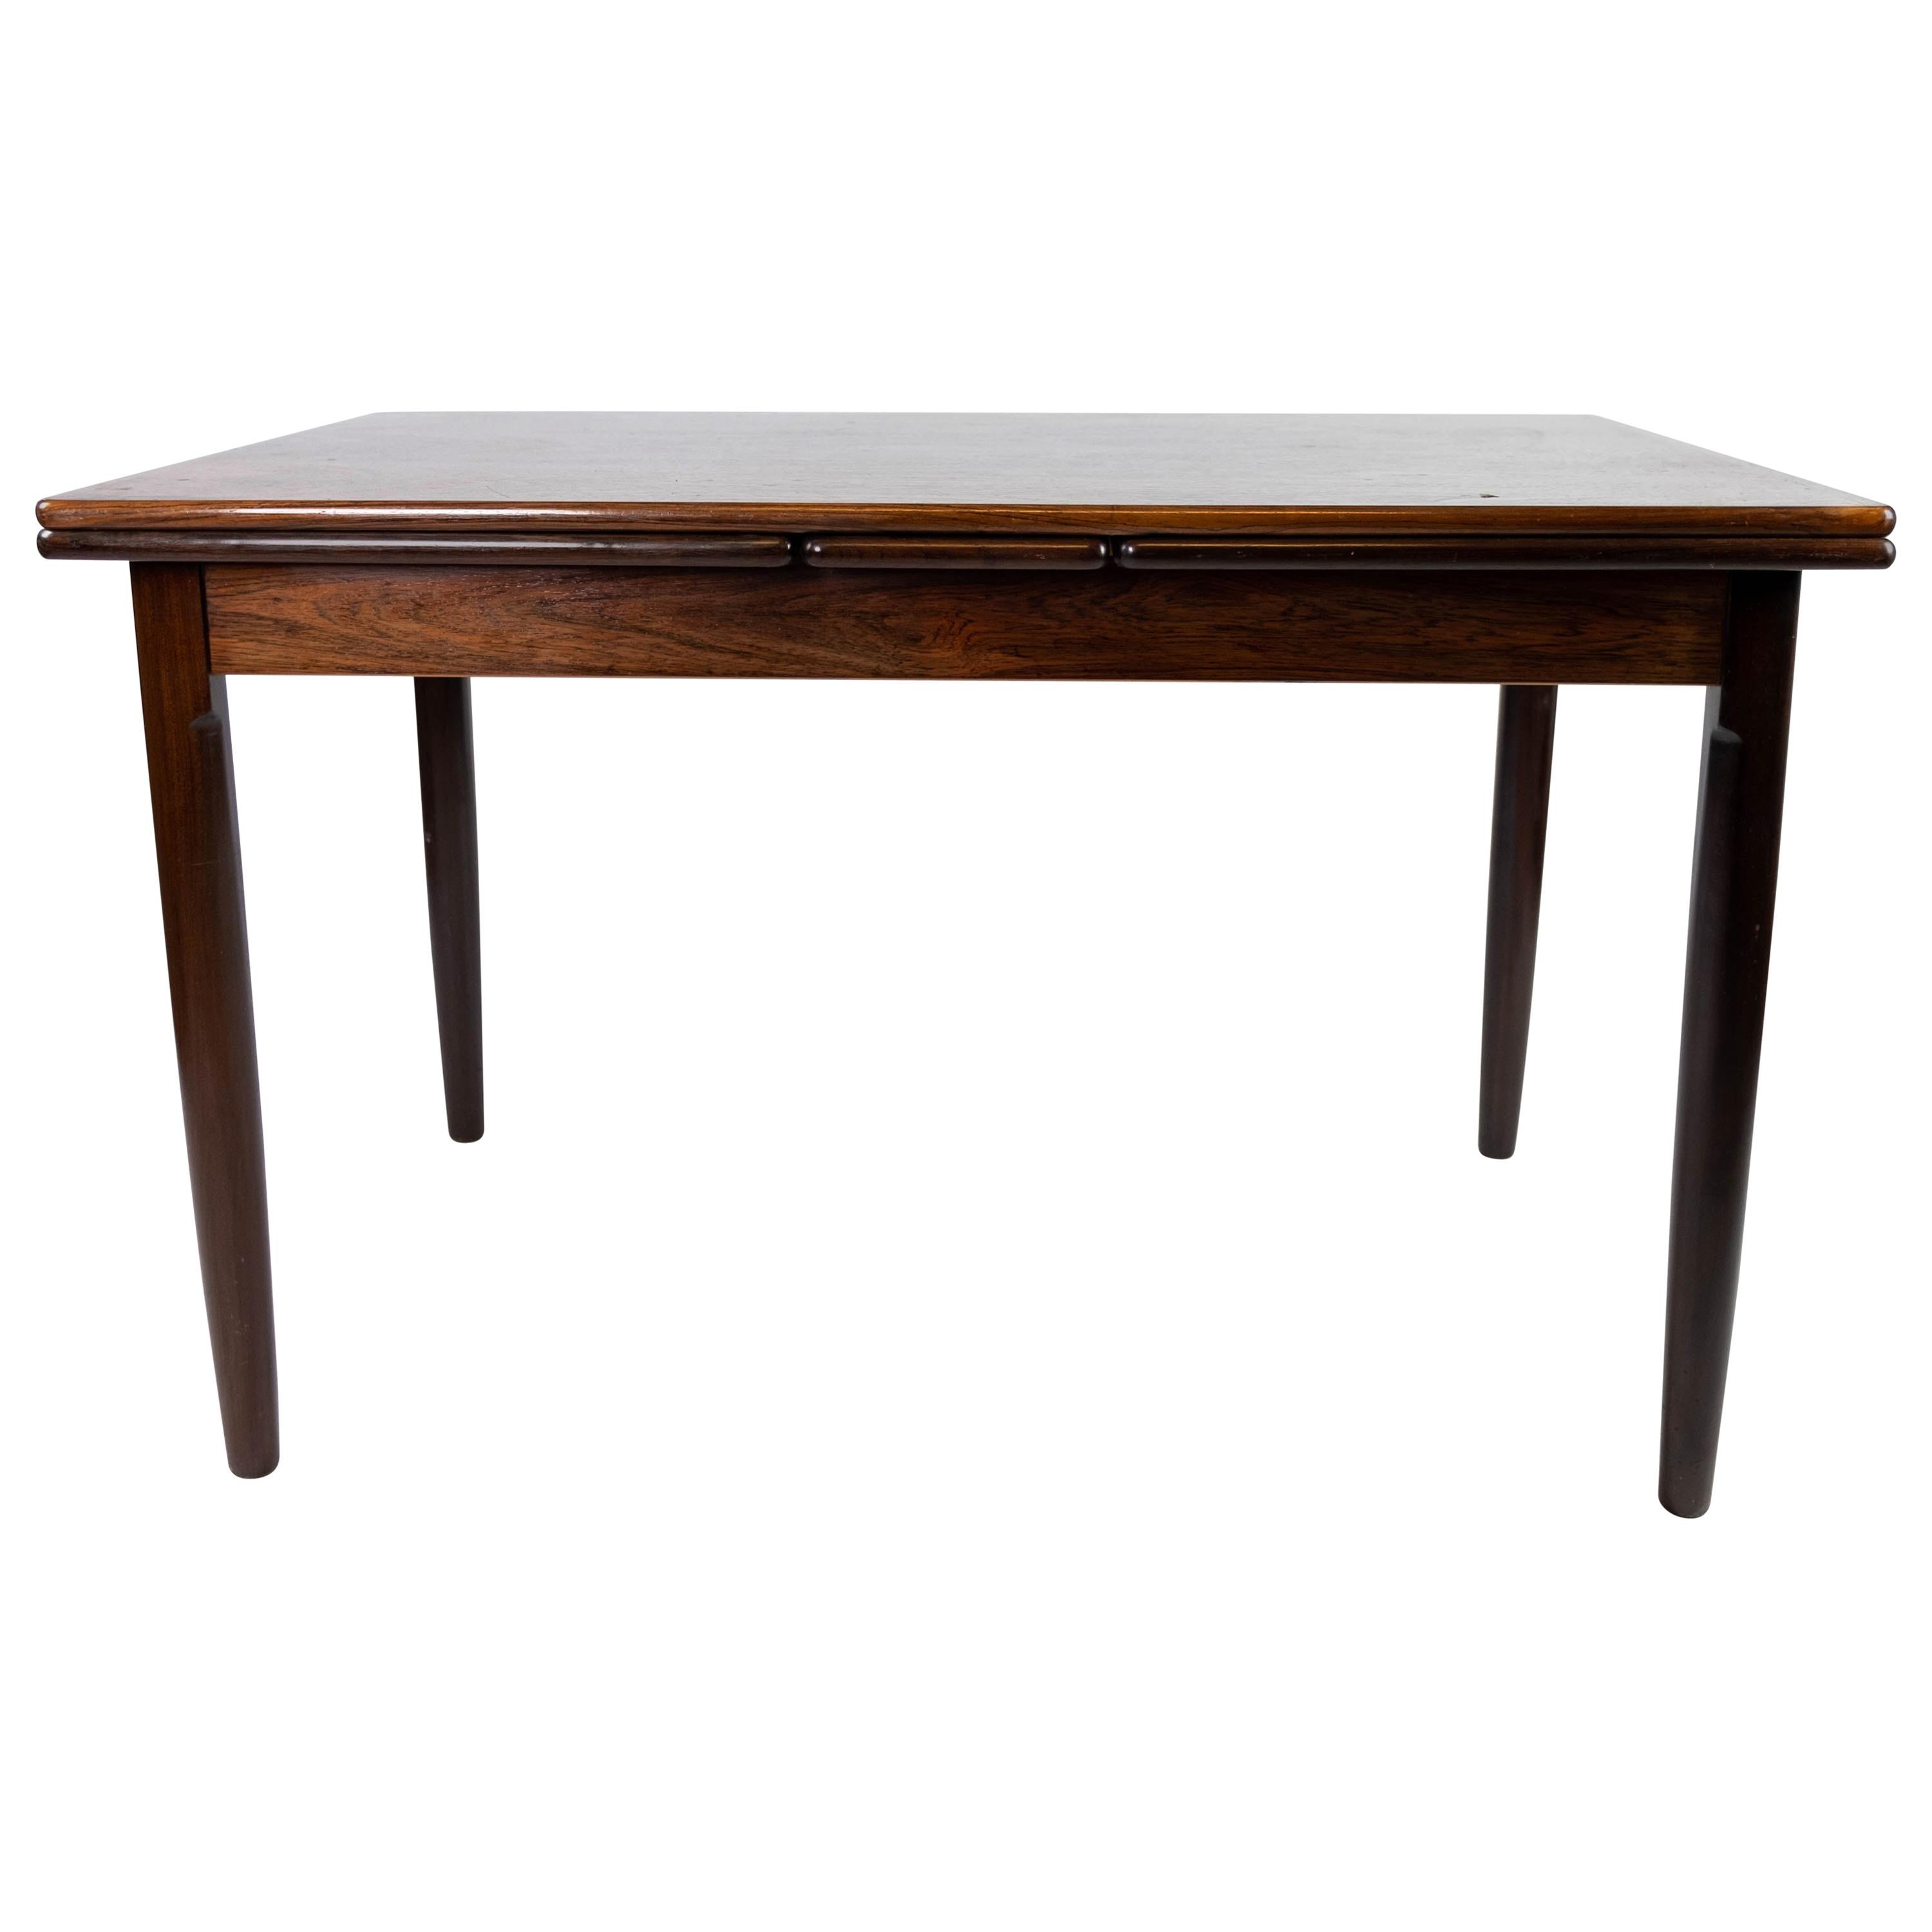 Dining Table Made In Rosewood With Extentions, Danish Design From 1960s